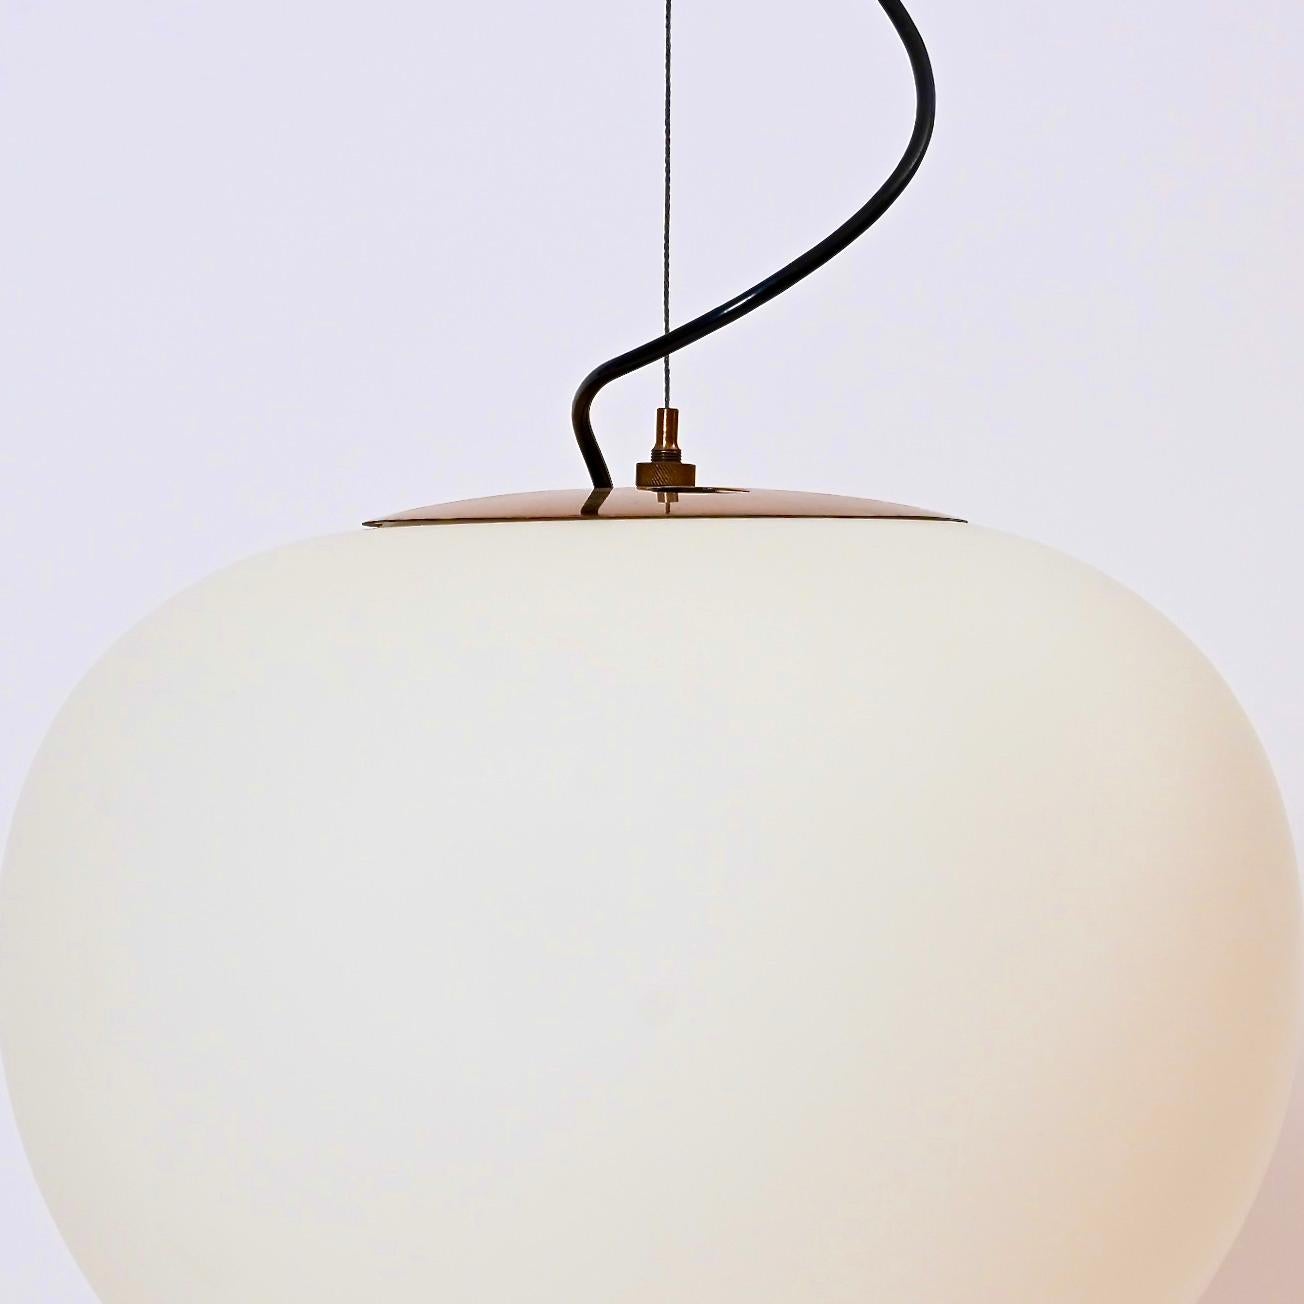 A wire-suspended opaline glass ceiling pendant designed by Bruno Gatta’s innovative Milanese lighting company, Stilnovo. Produced in the 1950s, the light is suspended from a steel wire and comprises of a lacquered brass fitting and a tapered,